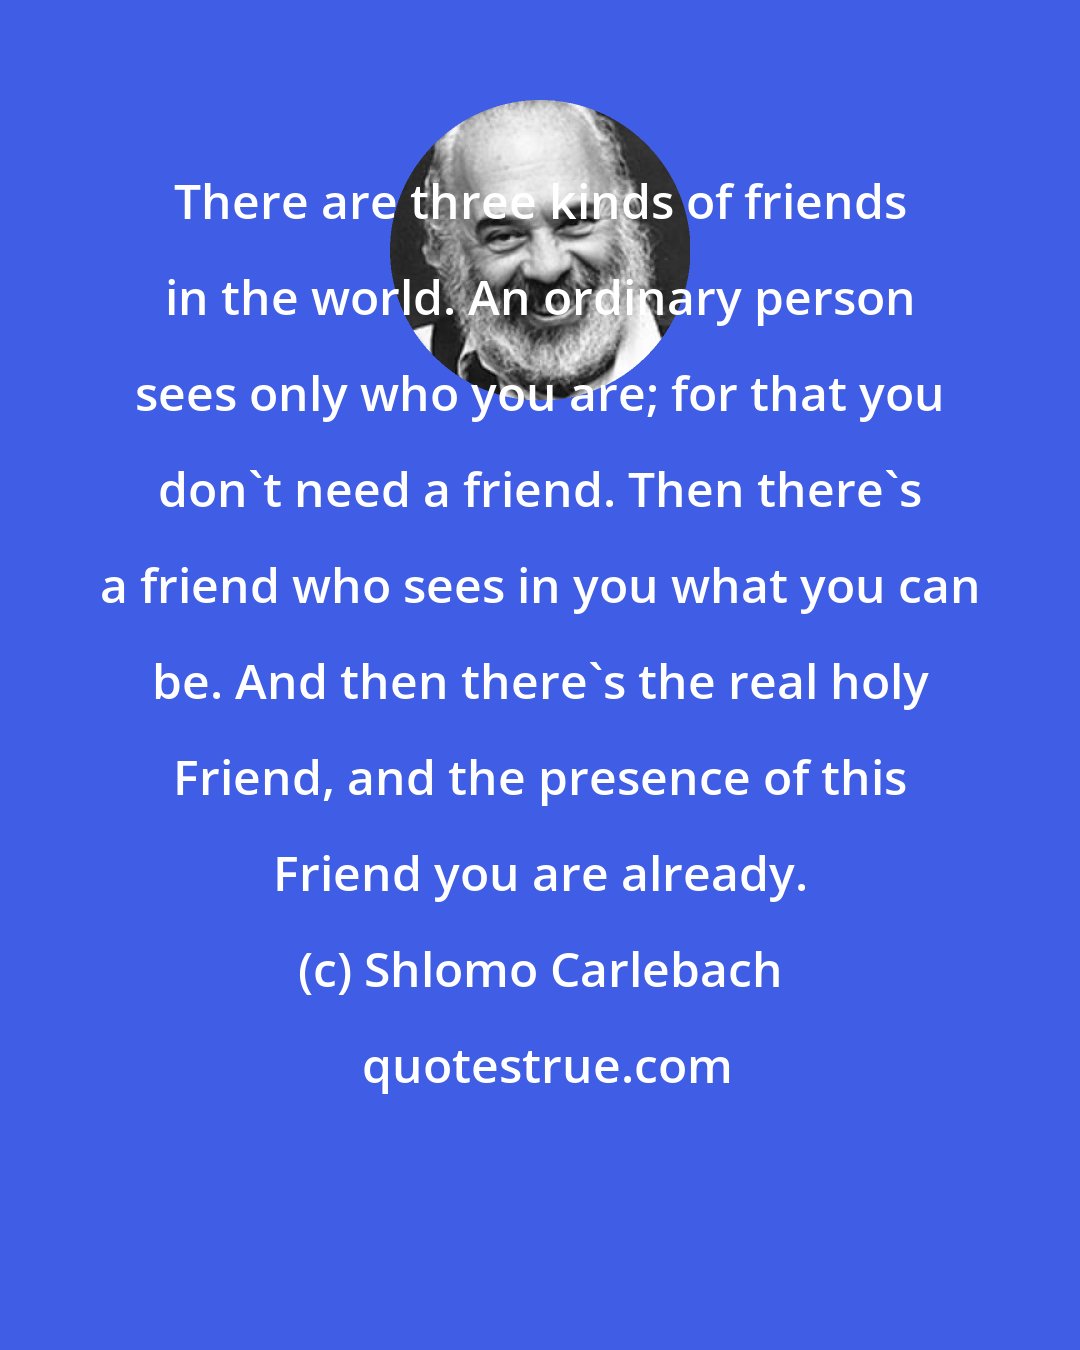 Shlomo Carlebach: There are three kinds of friends in the world. An ordinary person sees only who you are; for that you don't need a friend. Then there's a friend who sees in you what you can be. And then there's the real holy Friend, and the presence of this Friend you are already.